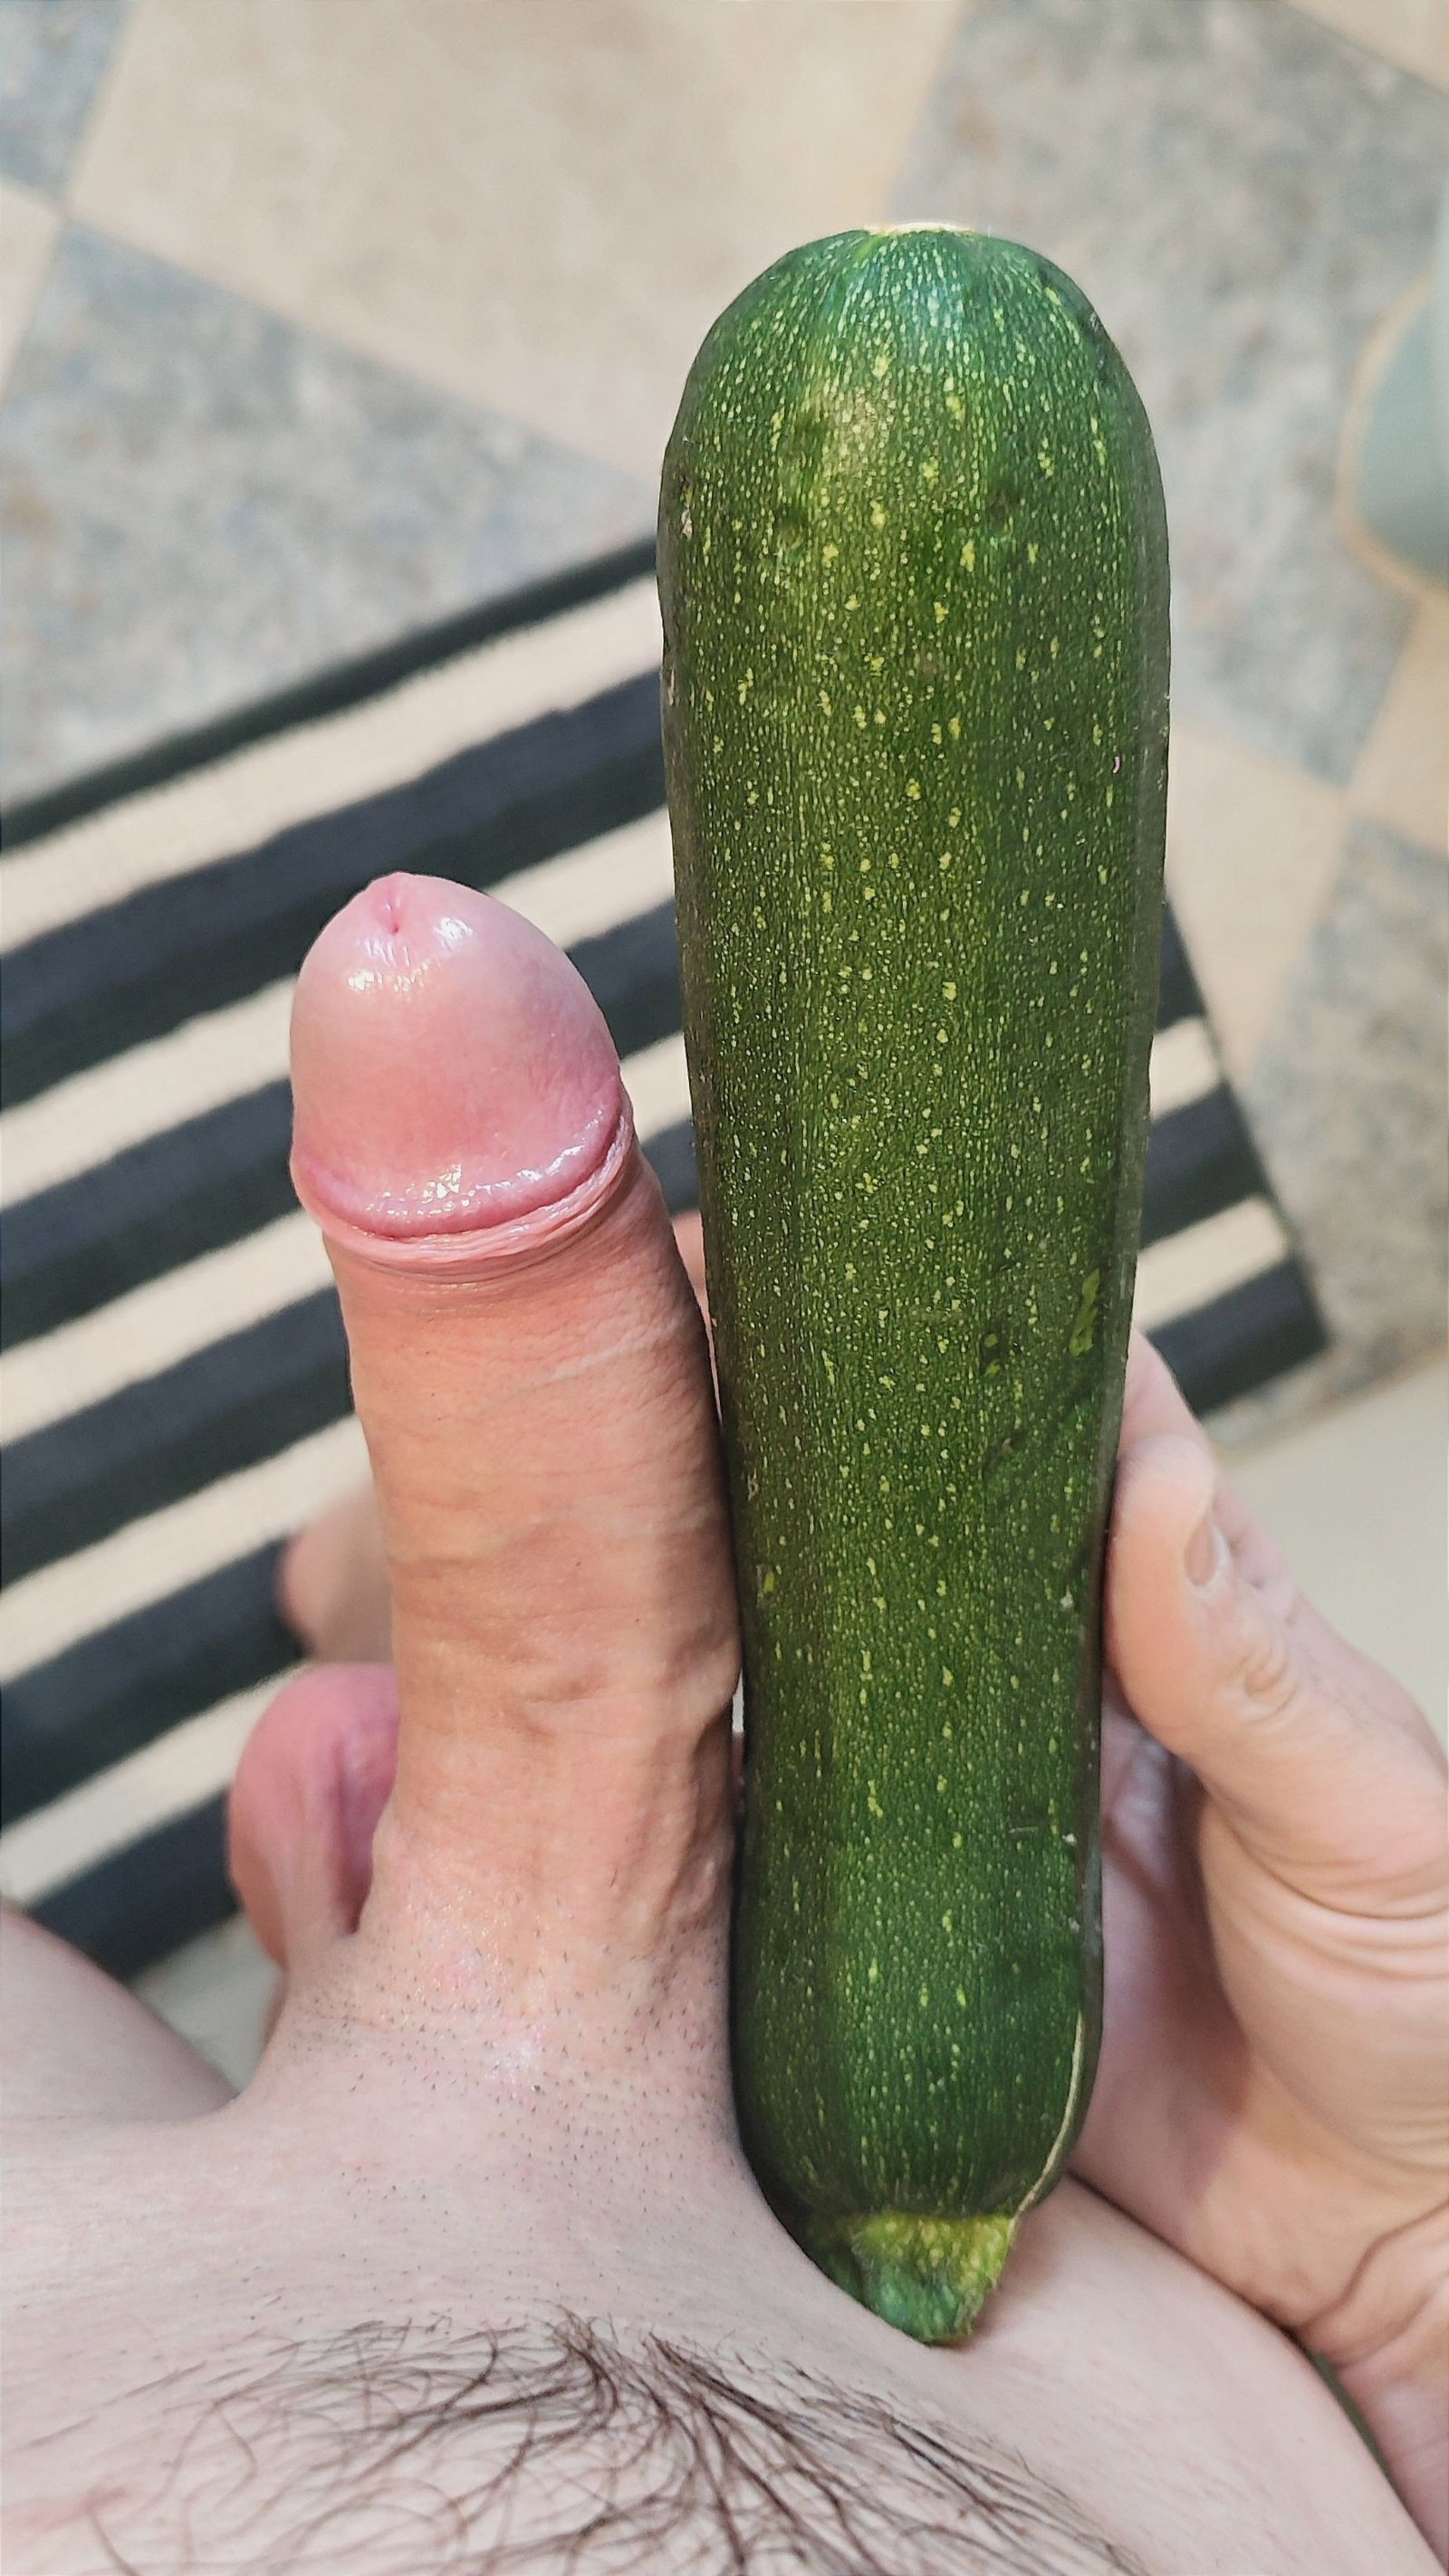 Photo by Alvaromadrid with the username @Alvaromadrid,  August 19, 2022 at 1:35 AM. The post is about the topic Rate my pussy or dick and the text says '#dick #cock #polla #pene #cum #paja #boy #chico #bisex #bisexual #bi #handjob #madrid #spain #rate #rateme #ratemydick #ratemycock #snapchat #sexting #girls snap: a_diversion2019'